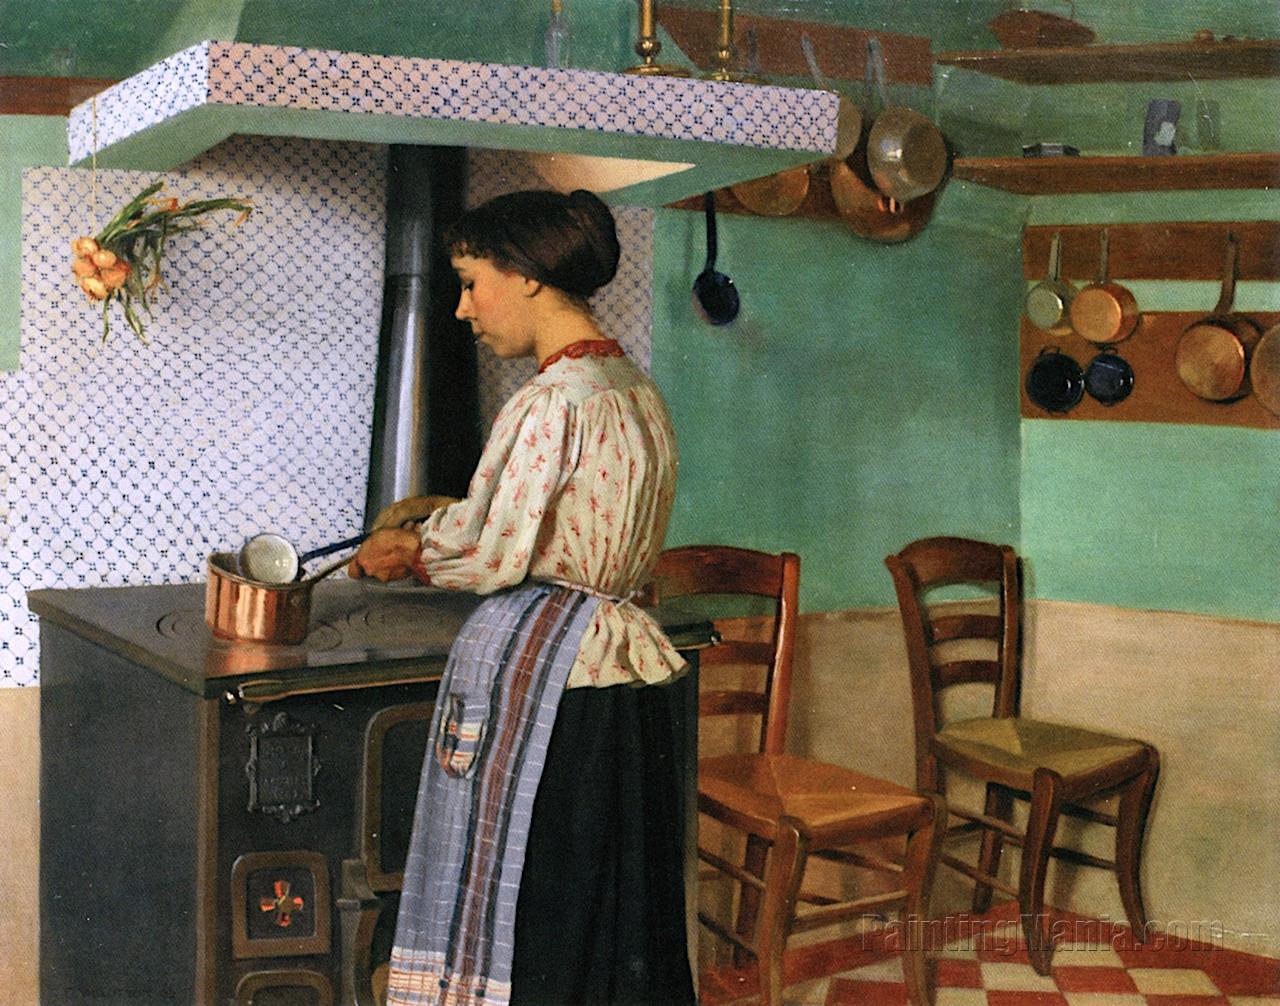 Cook at the Stove